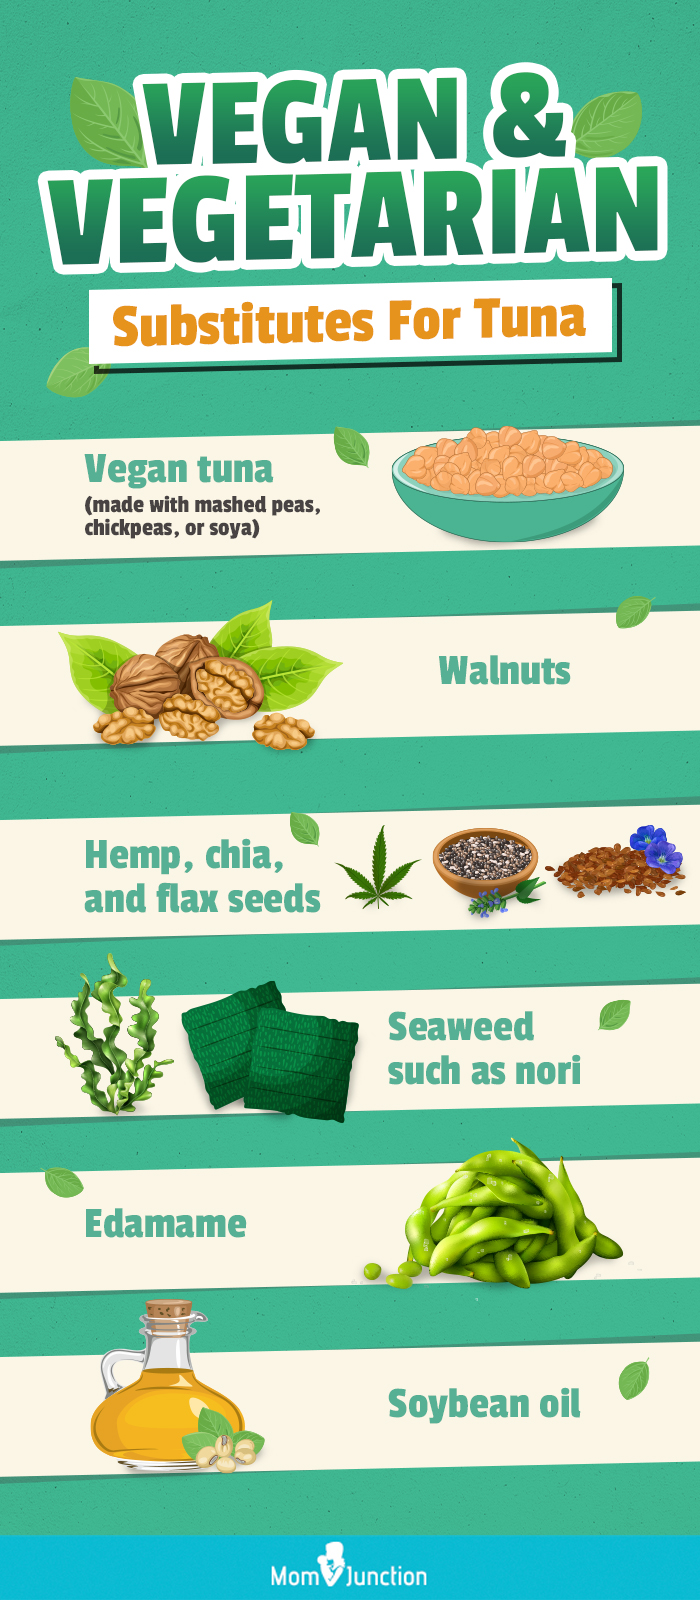 vegan and vegetarian substitutes for tuna [infographic]